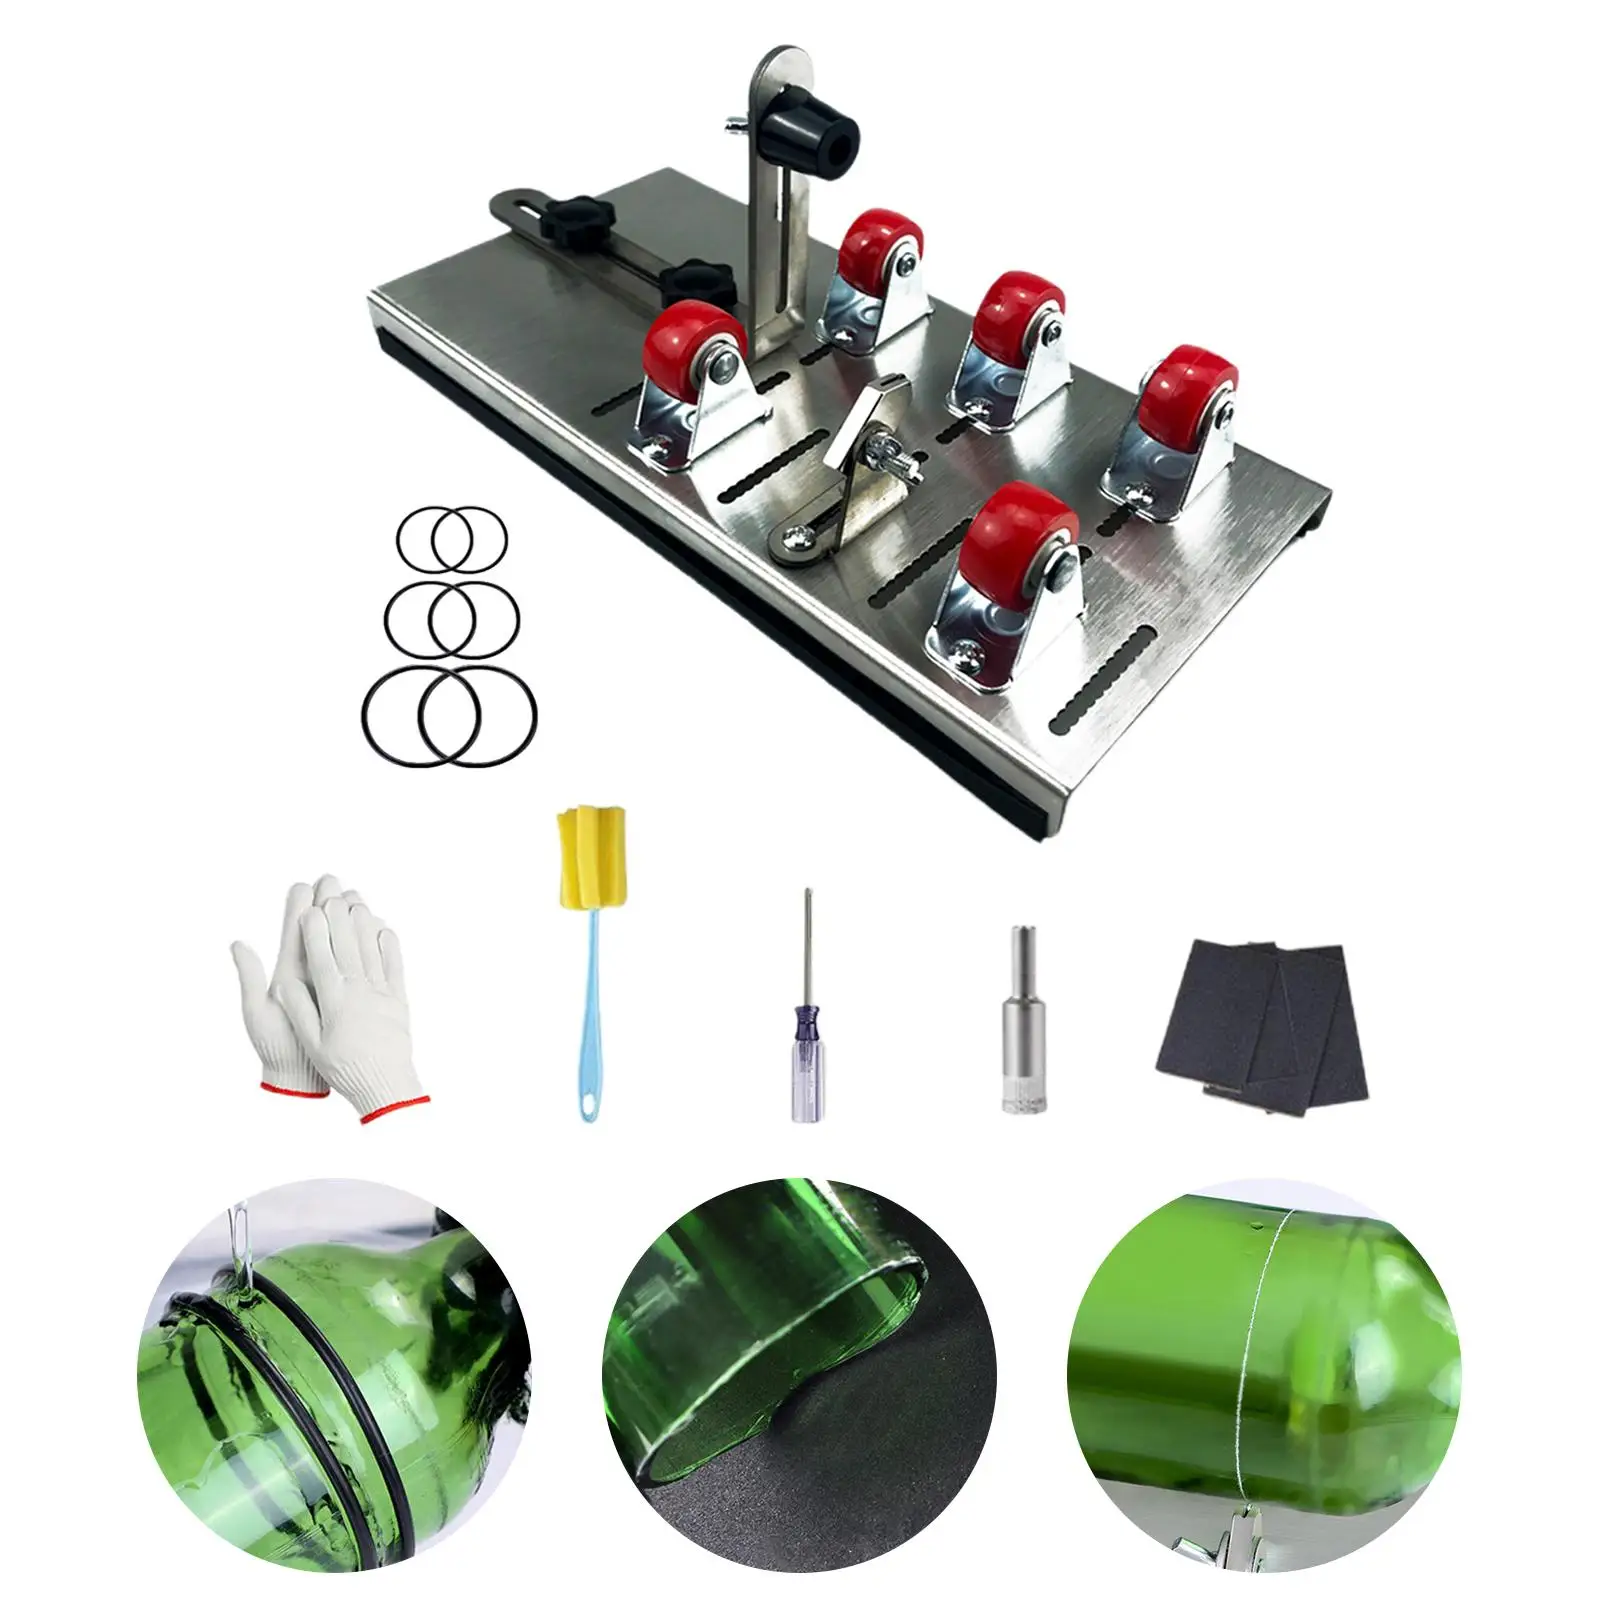 Glass Bottle Cutter Set Multifunctional DIY Project Crafts Professional for